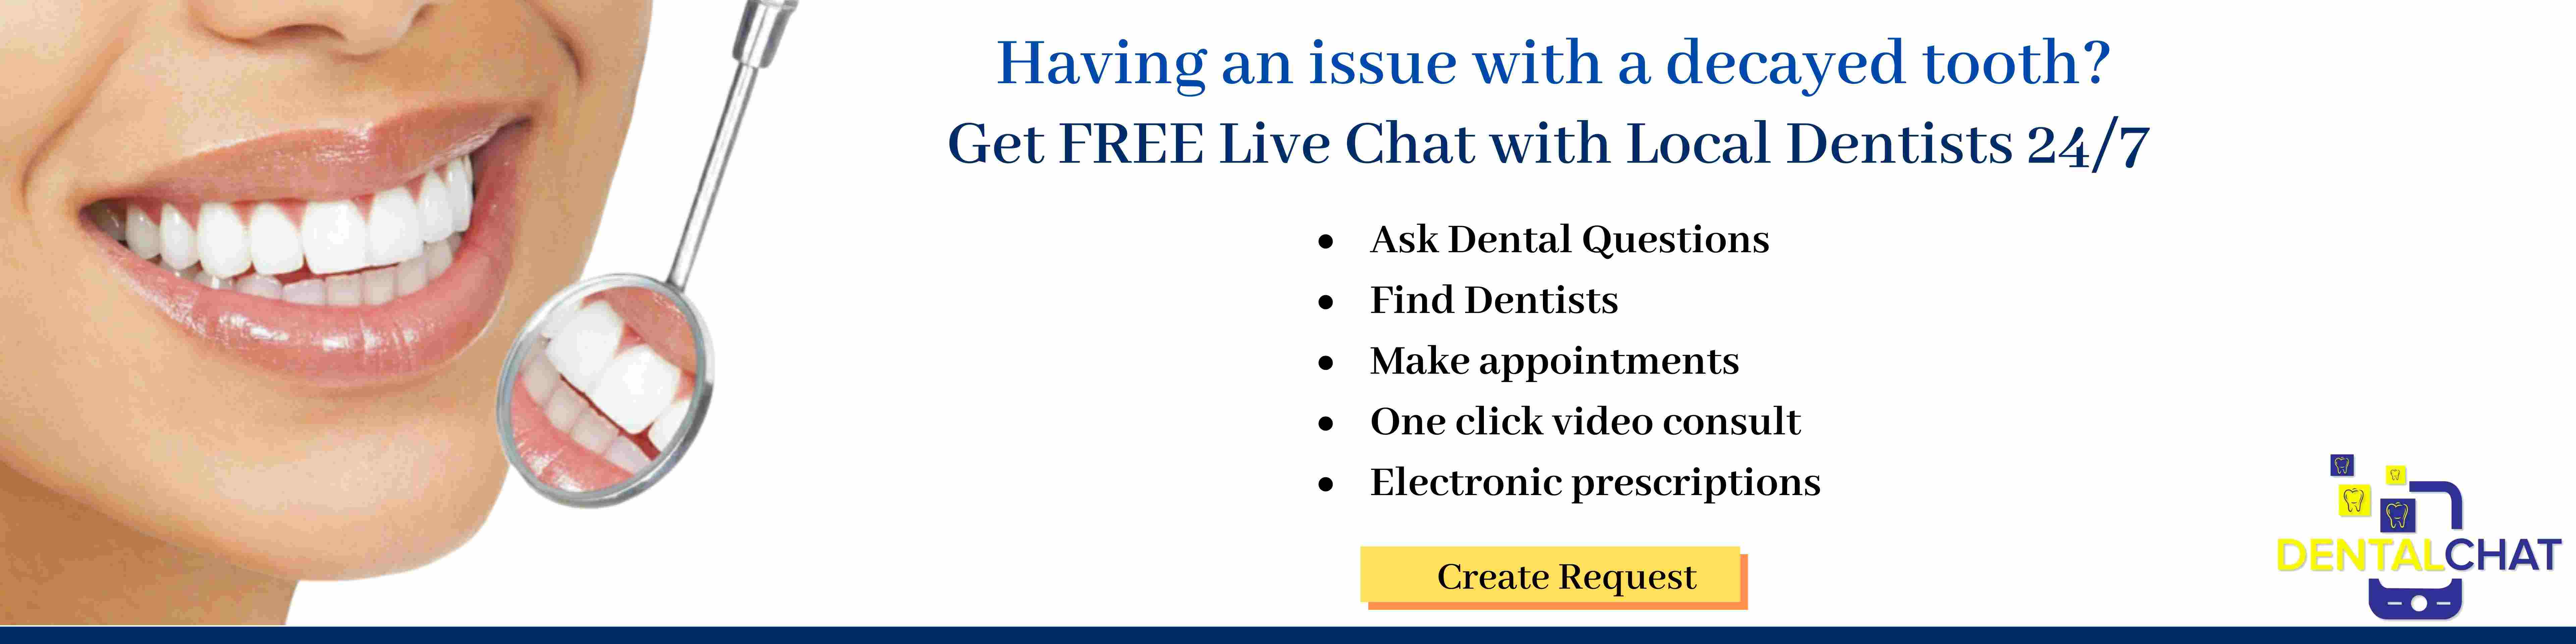 Local tooth pain teledental consulting, teeth pain question chat and online toothache blogging